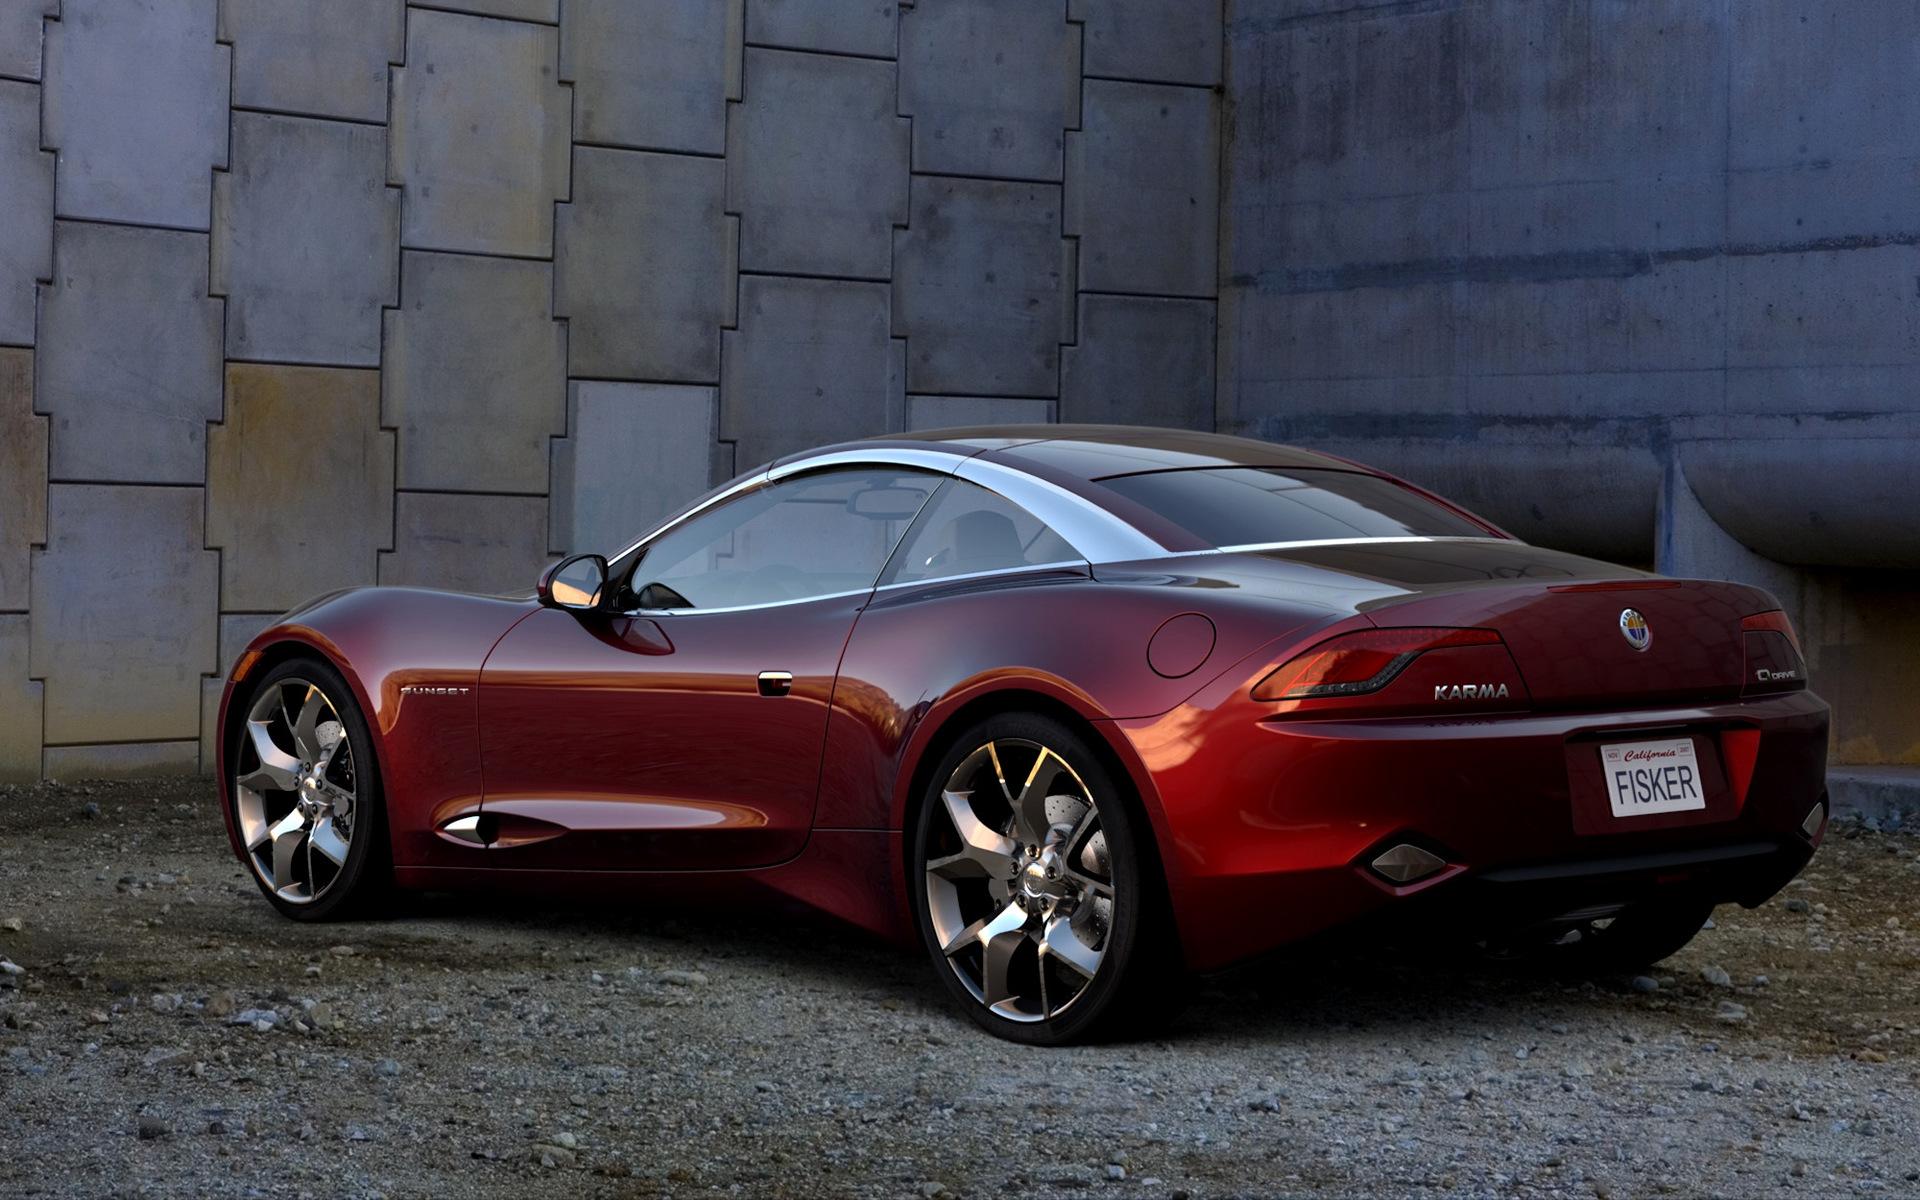 Fisker Karma S Concept and HD Image